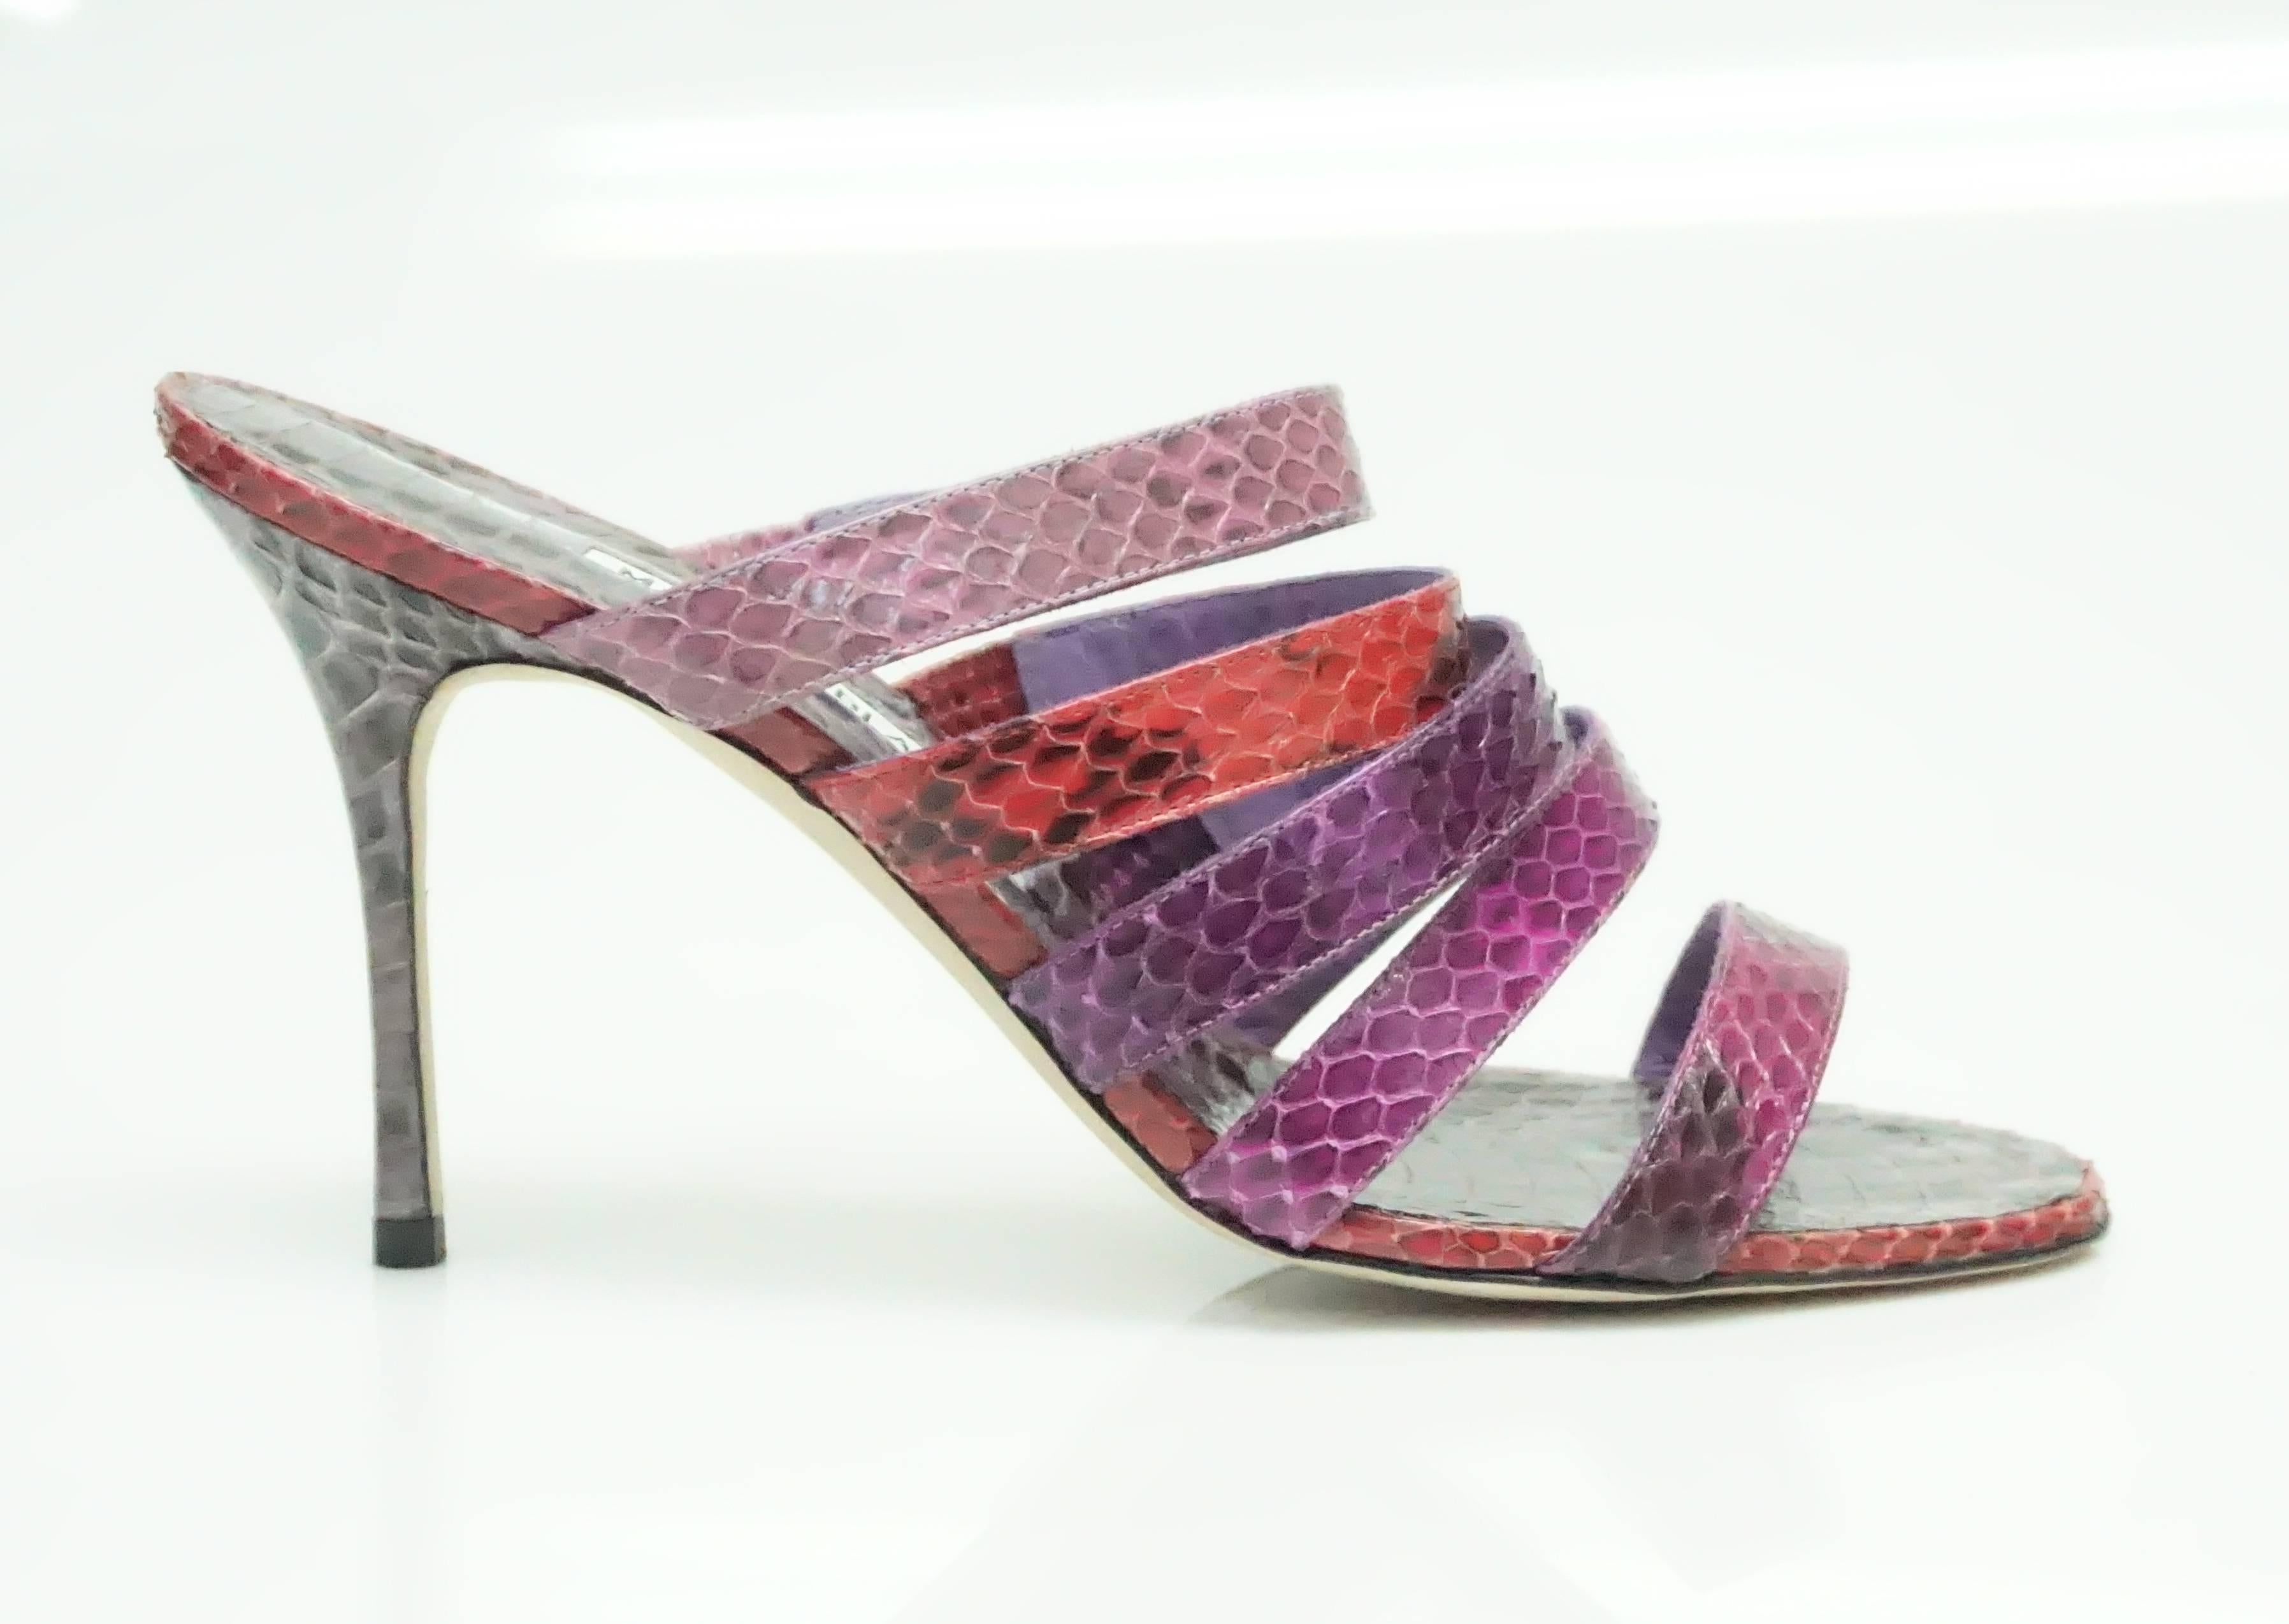 Manolo Blahnik Purple & Red Strappy Python Sandal - 38 - NEW/NEVER WORN  These striking python shoes have never been worn before. They have an open heel and just have five straps across. The colors consist of purples and pinks. 
Measurements
Heel: 4